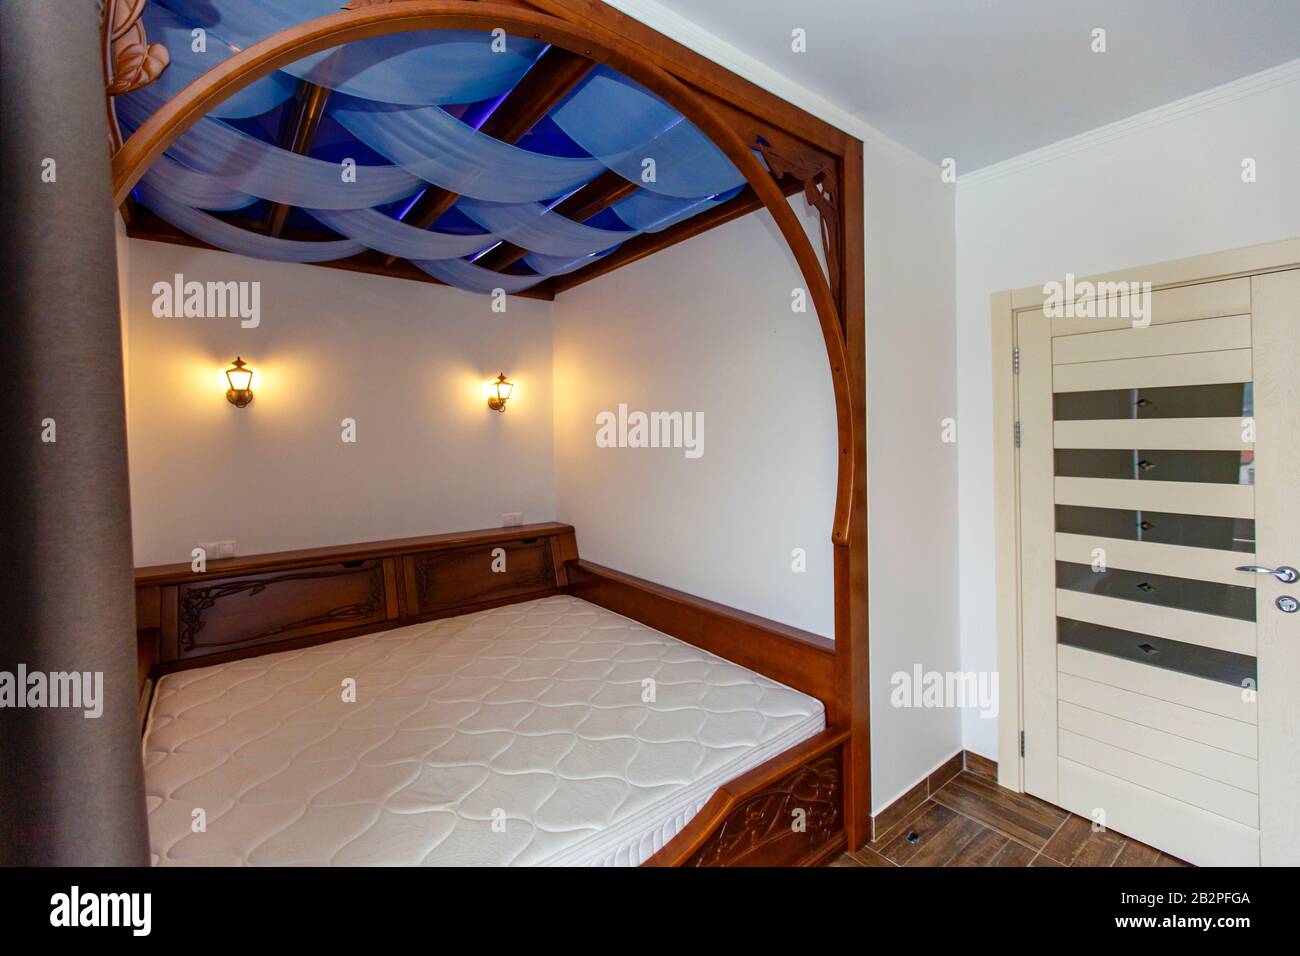 Bedroom In The Cottage With A Large Wooden Four Poster Bed The